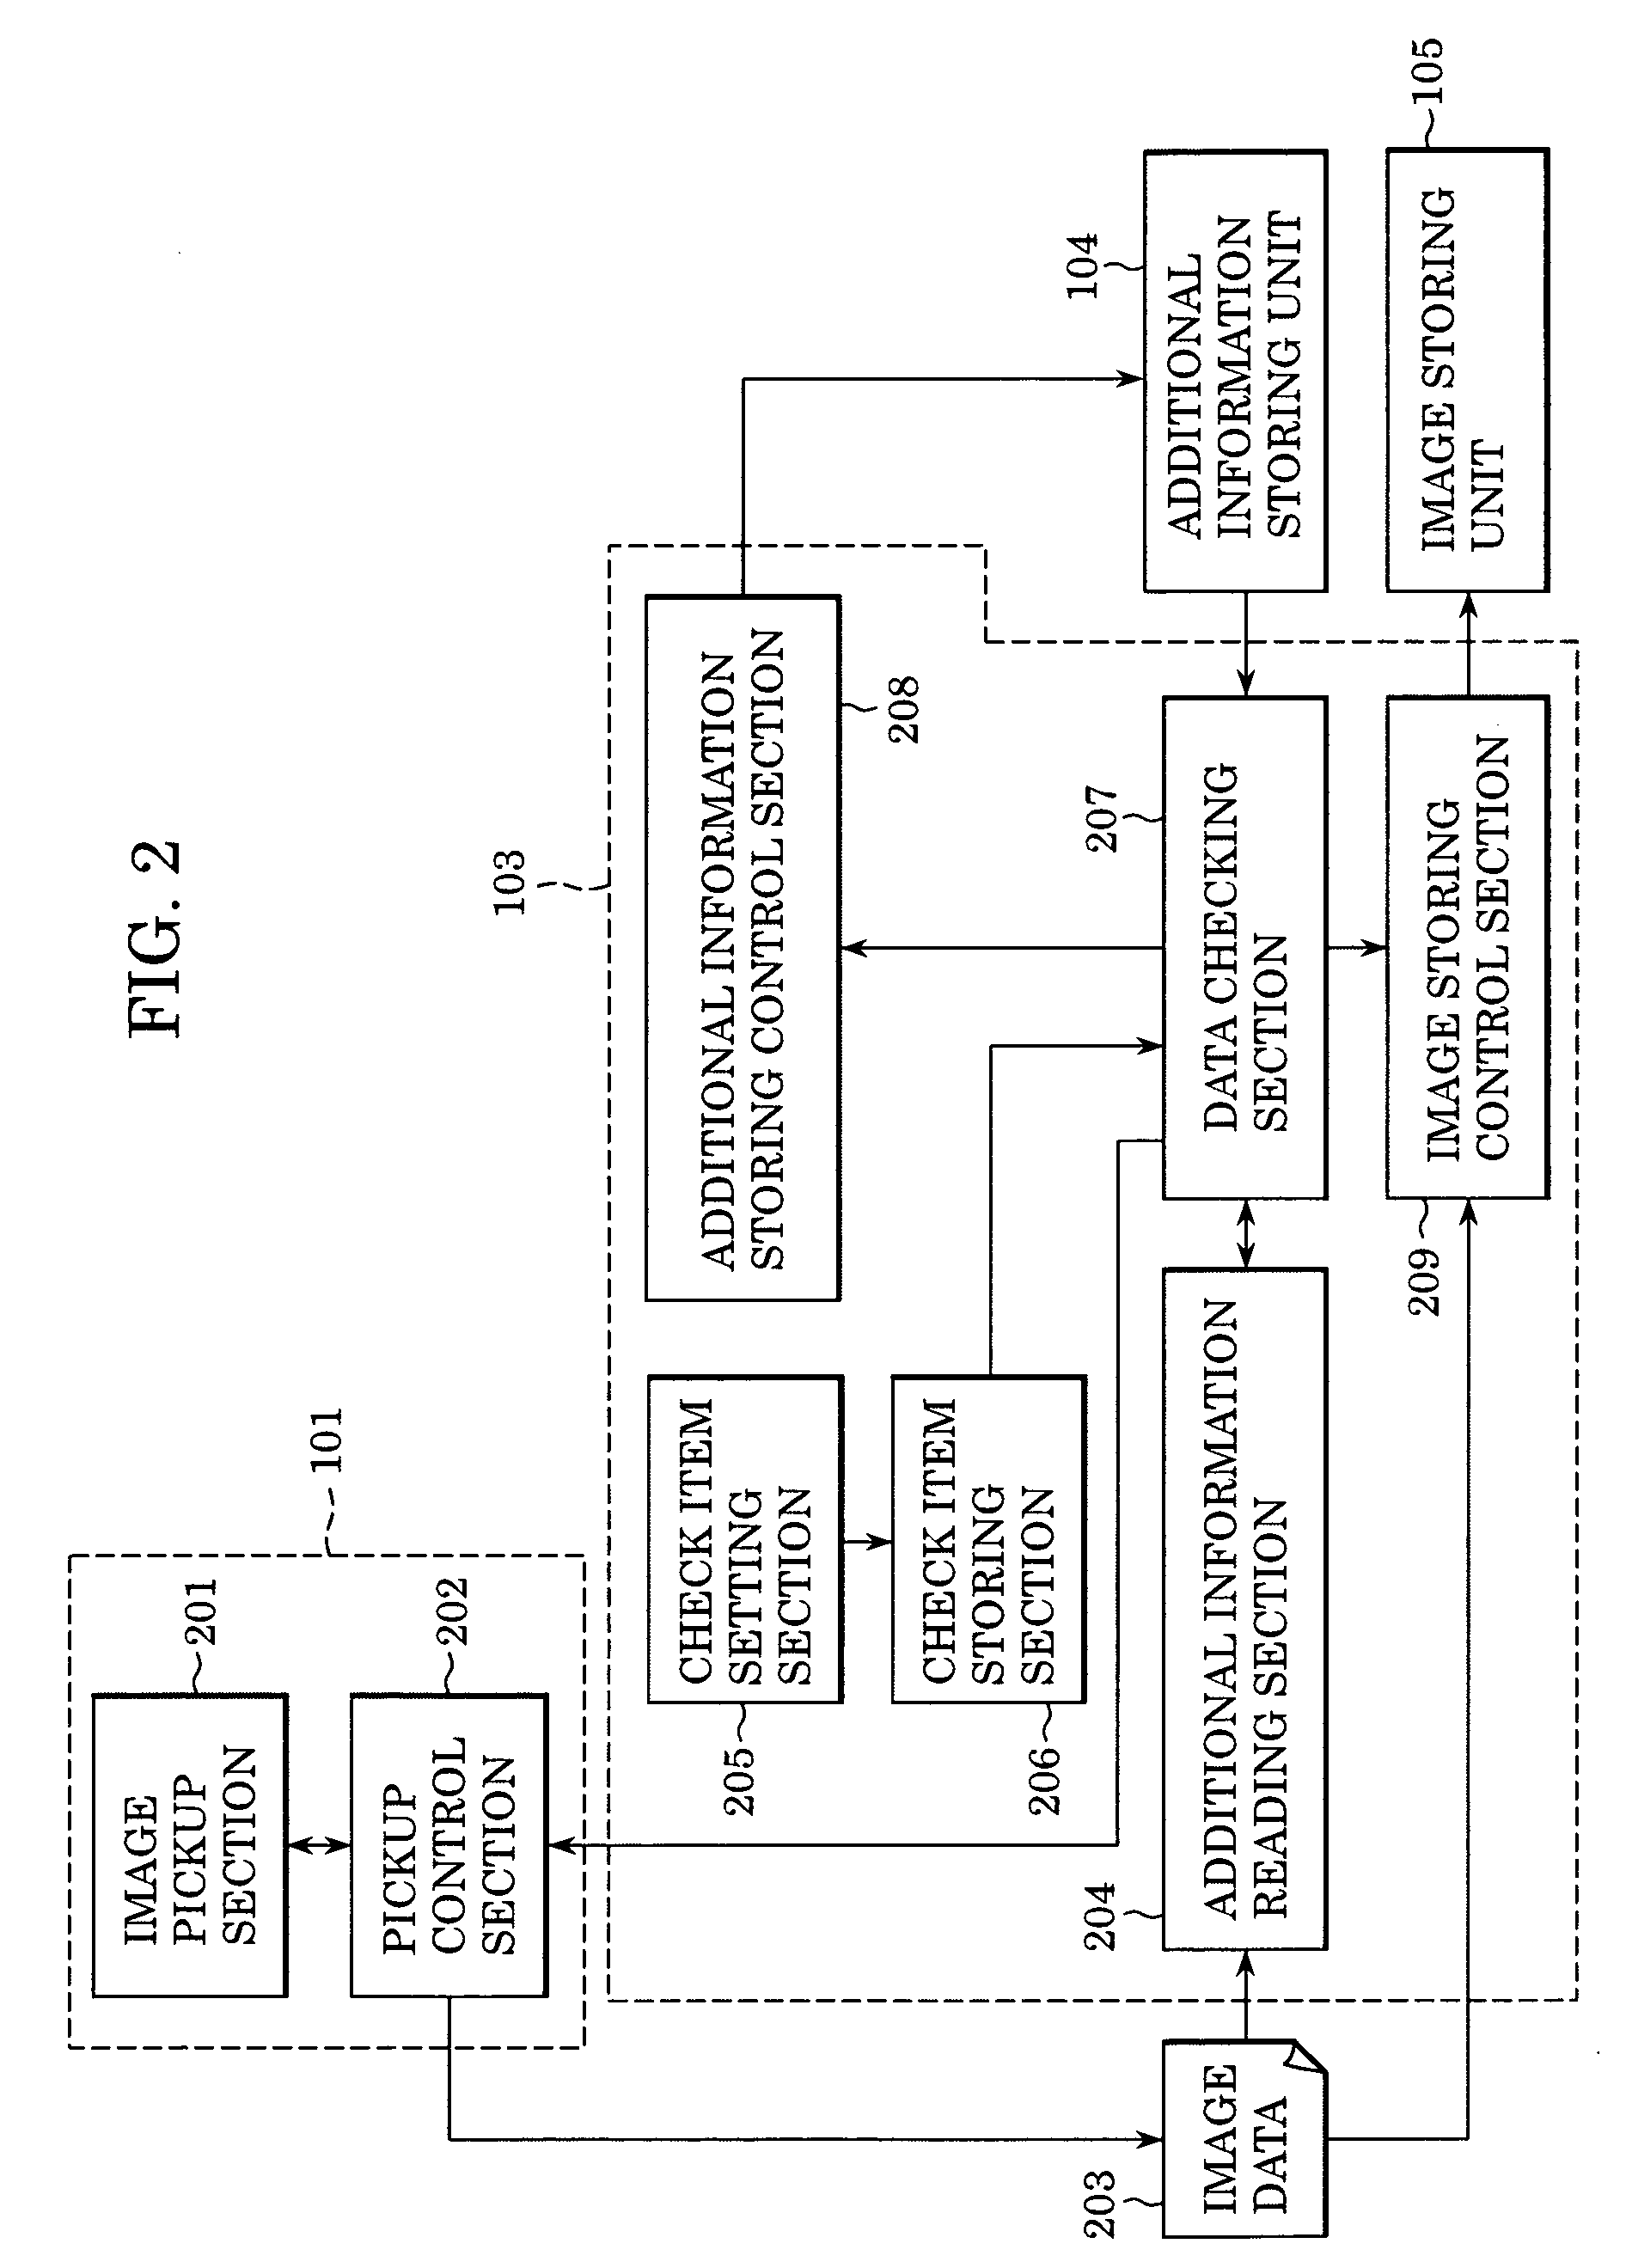 Image processing method and image processing apparatus for registering additional information of image information